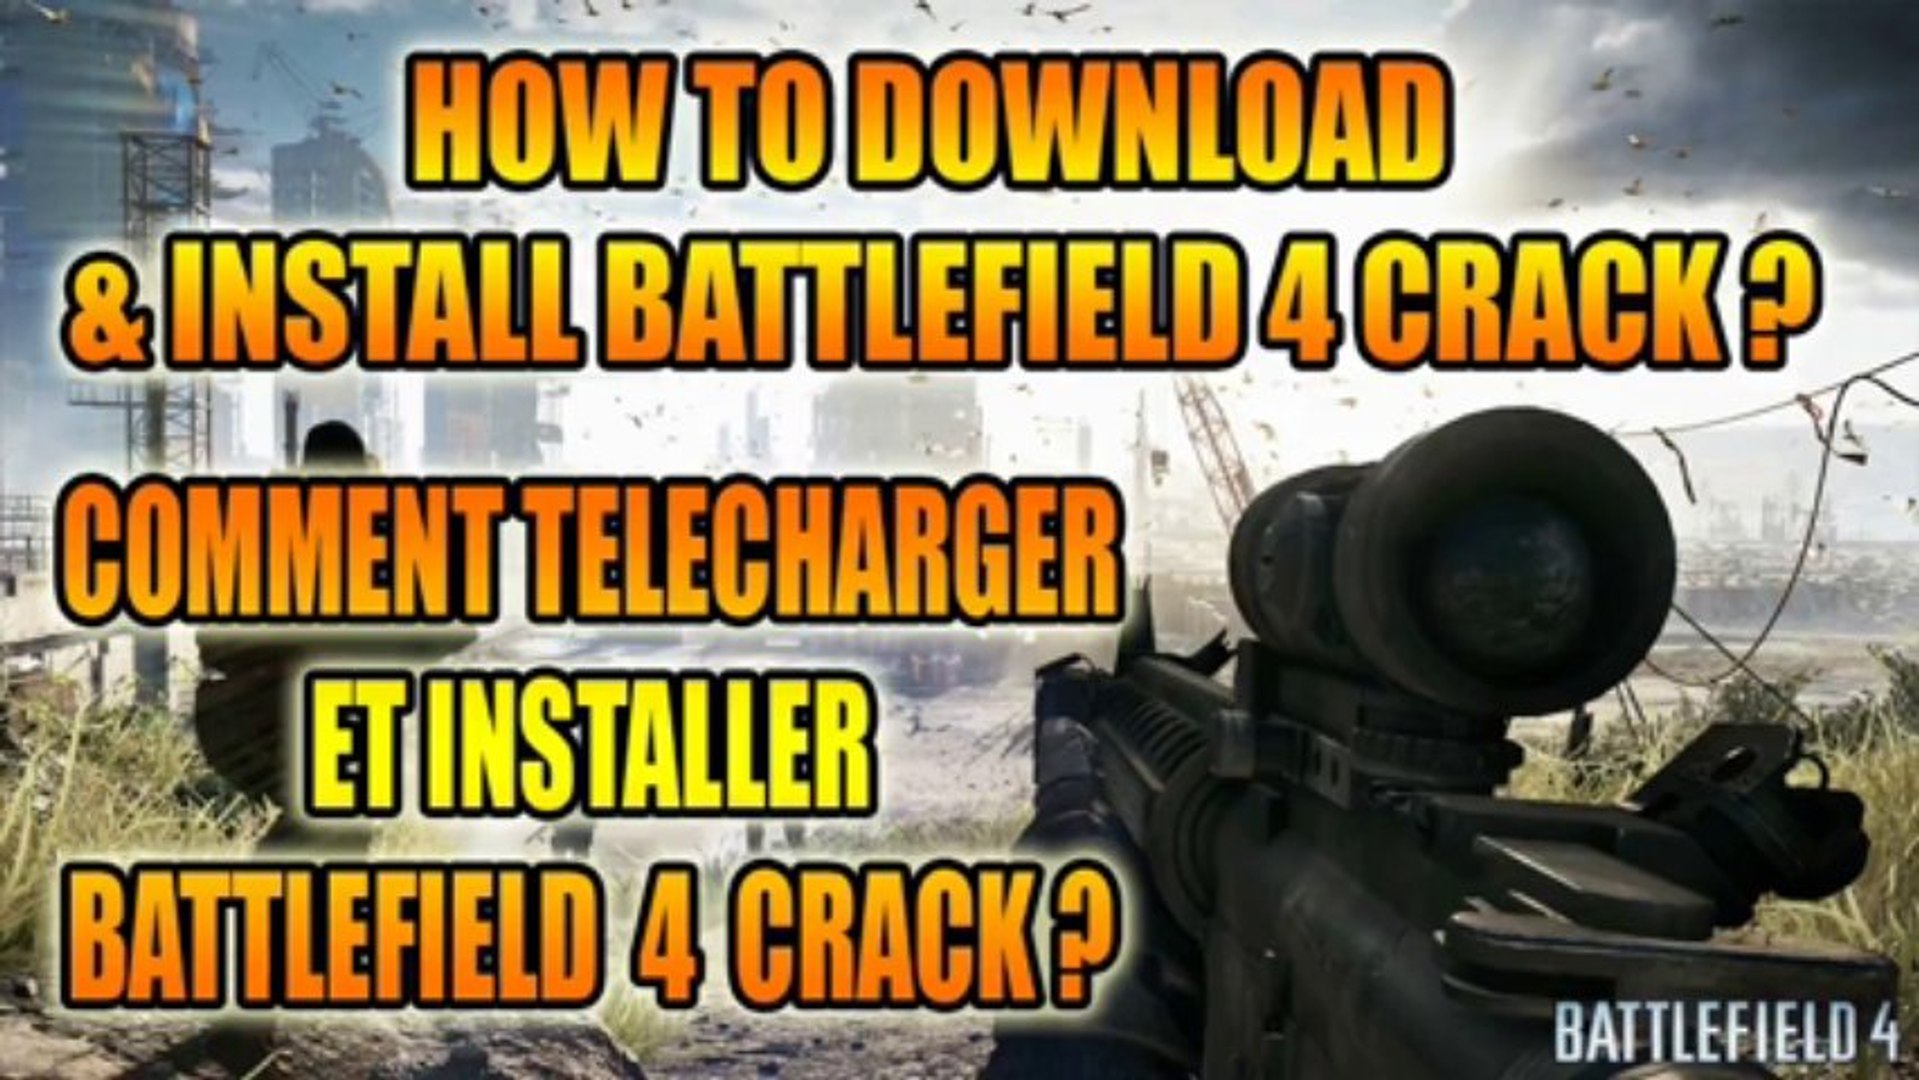 Battlefield 4 for PC: How to Download for Free and Legally